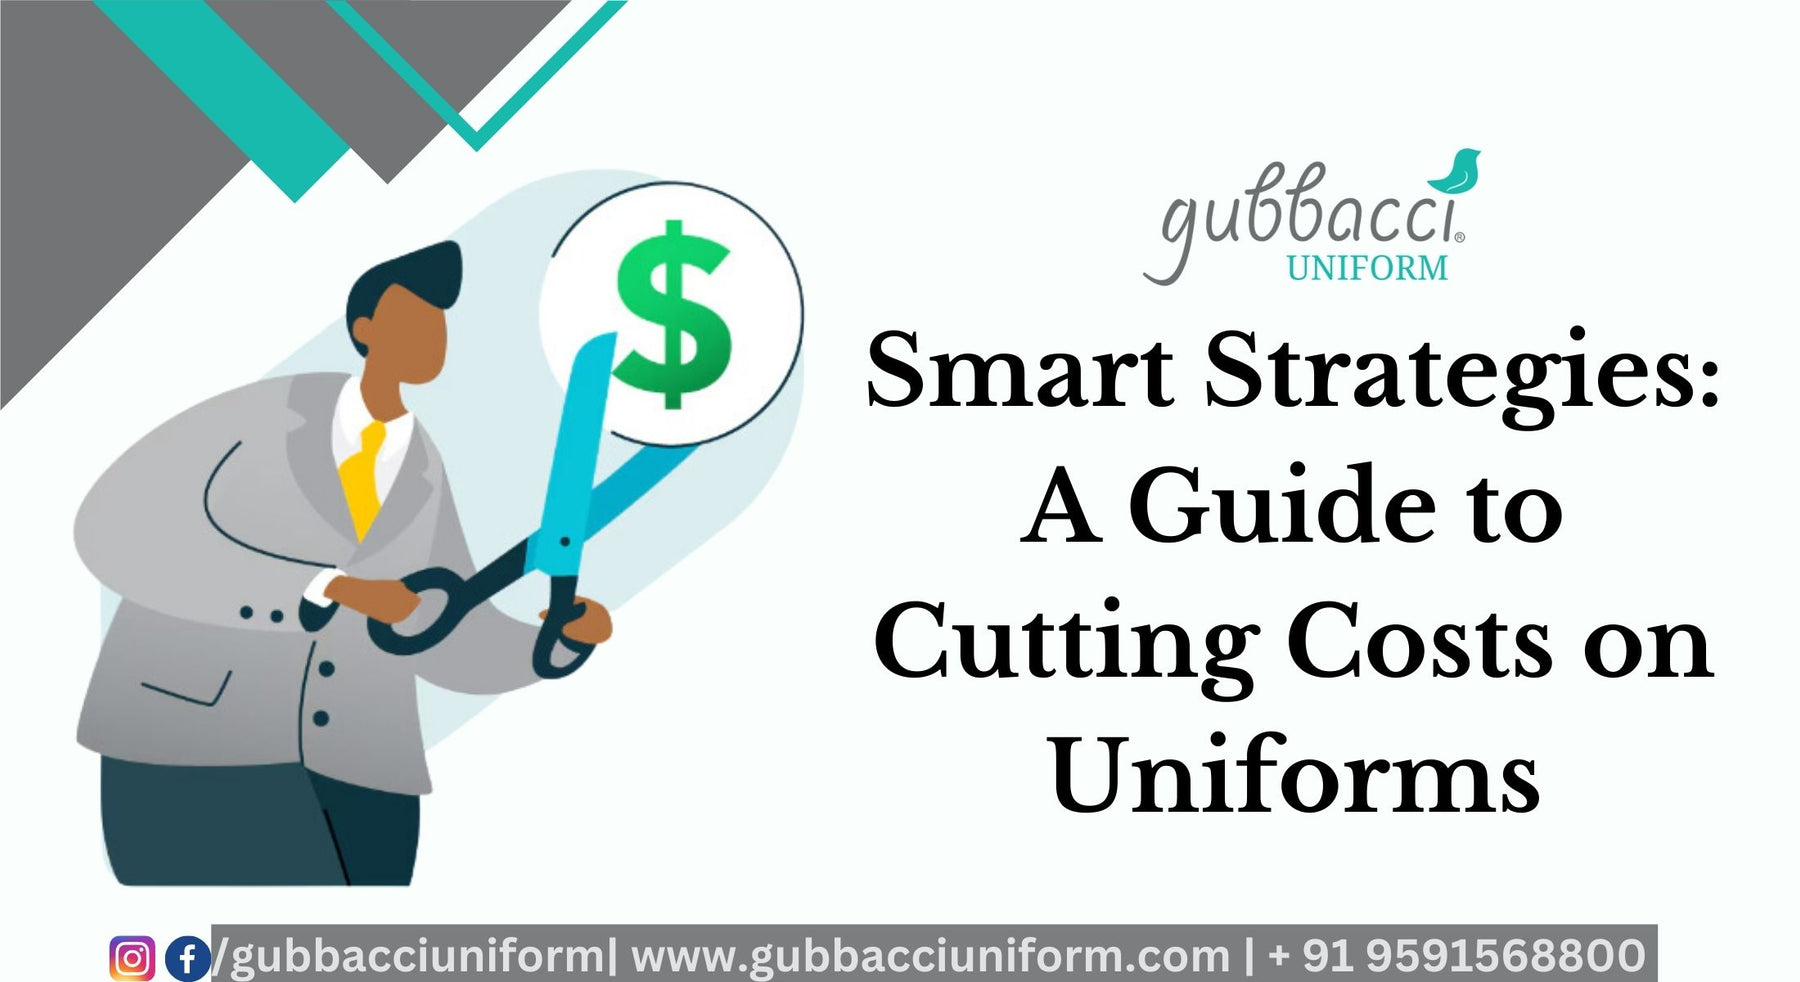 Smart Strategies: A Guide to Cutting Costs on Uniforms